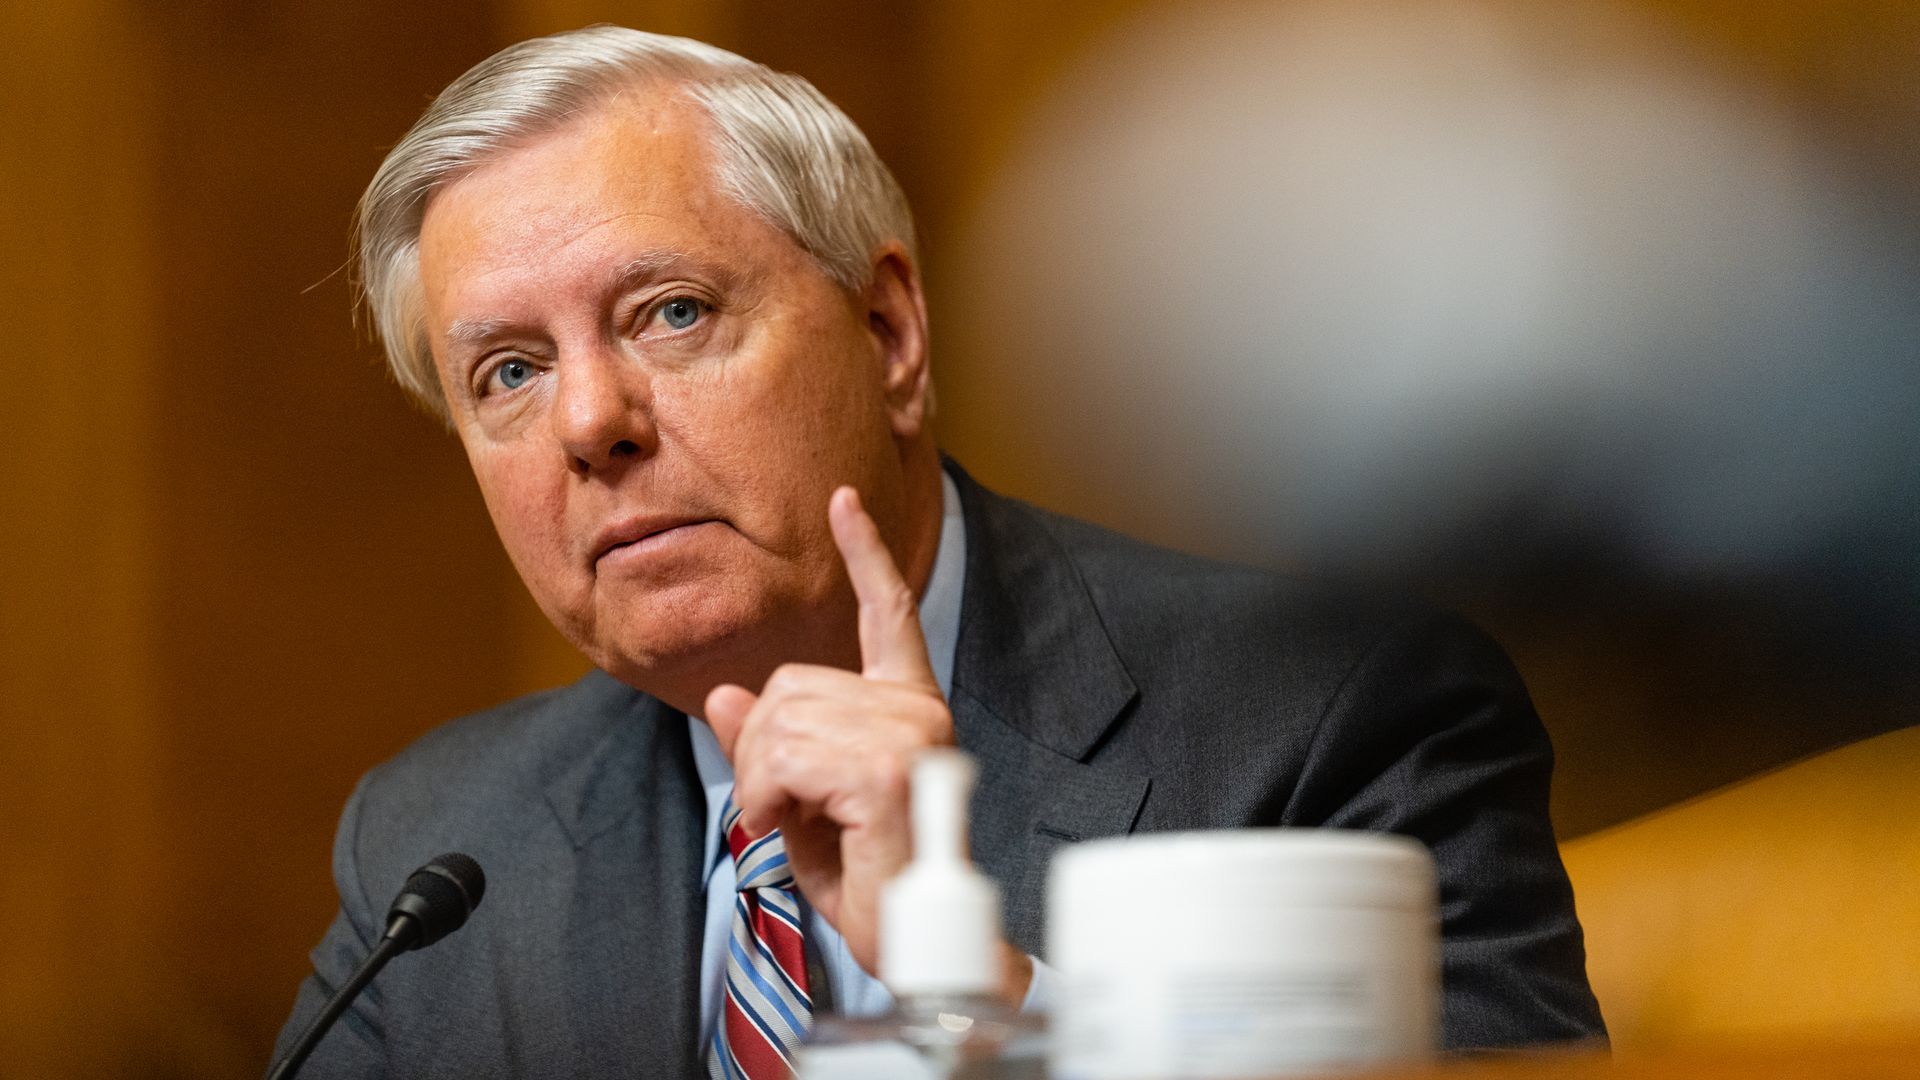 Senator Lindsey Graham, a Republican from South Carolina, speaks during a hearing in Washington, D.C., U.S., on Thursday, May 5.